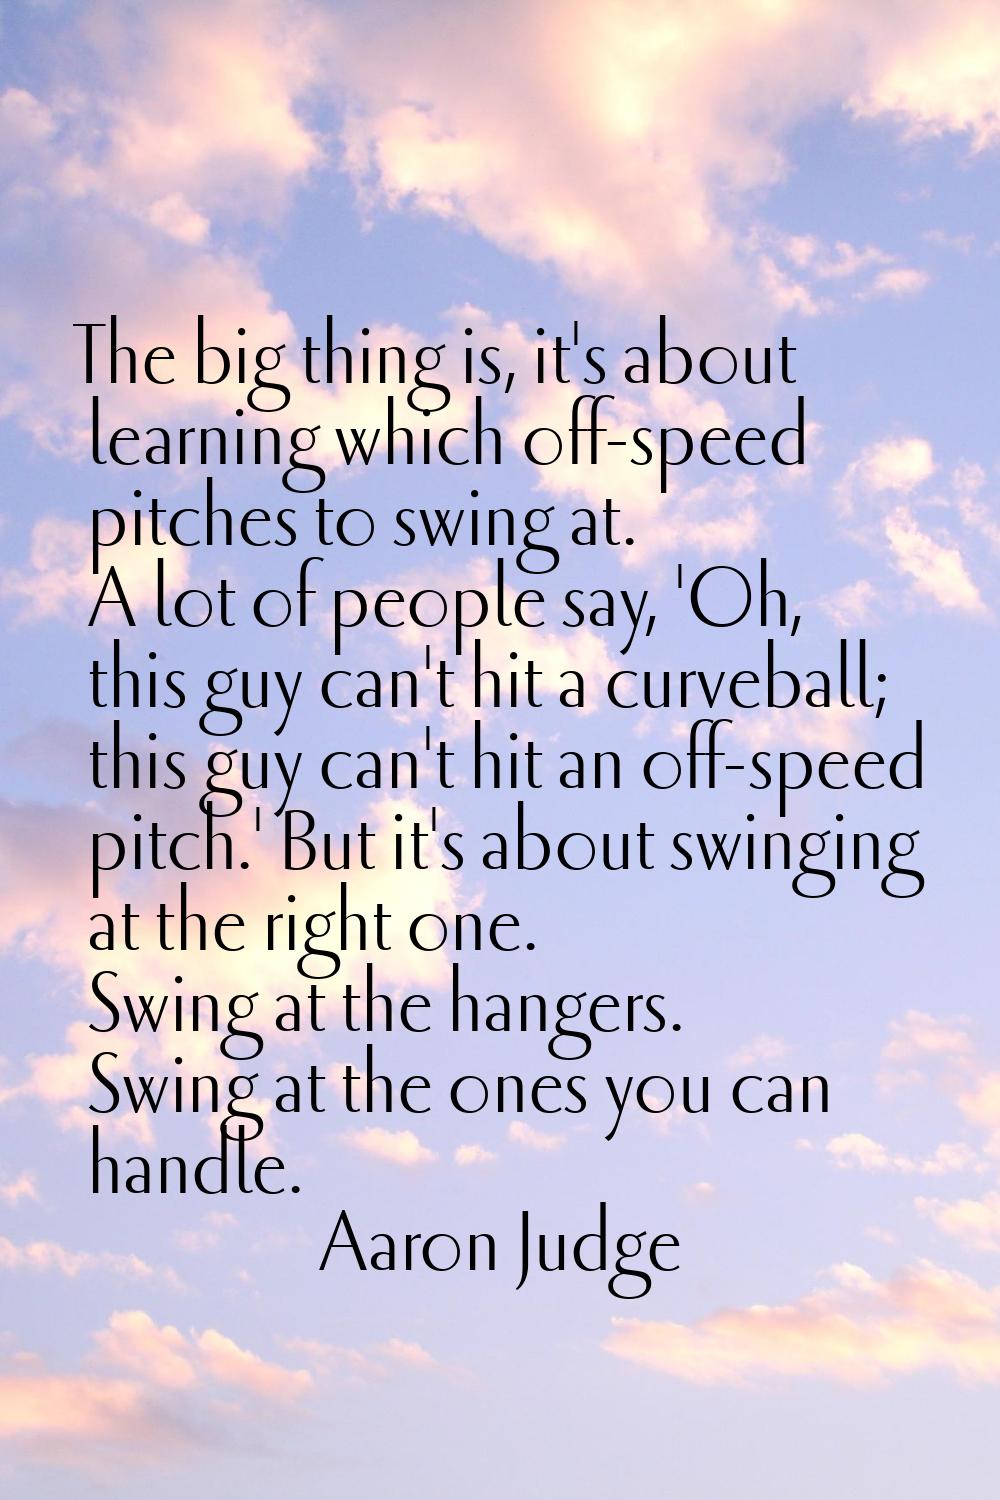 The big thing is, it's about learning which off-speed pitches to swing at. A lot of people say, 'Oh